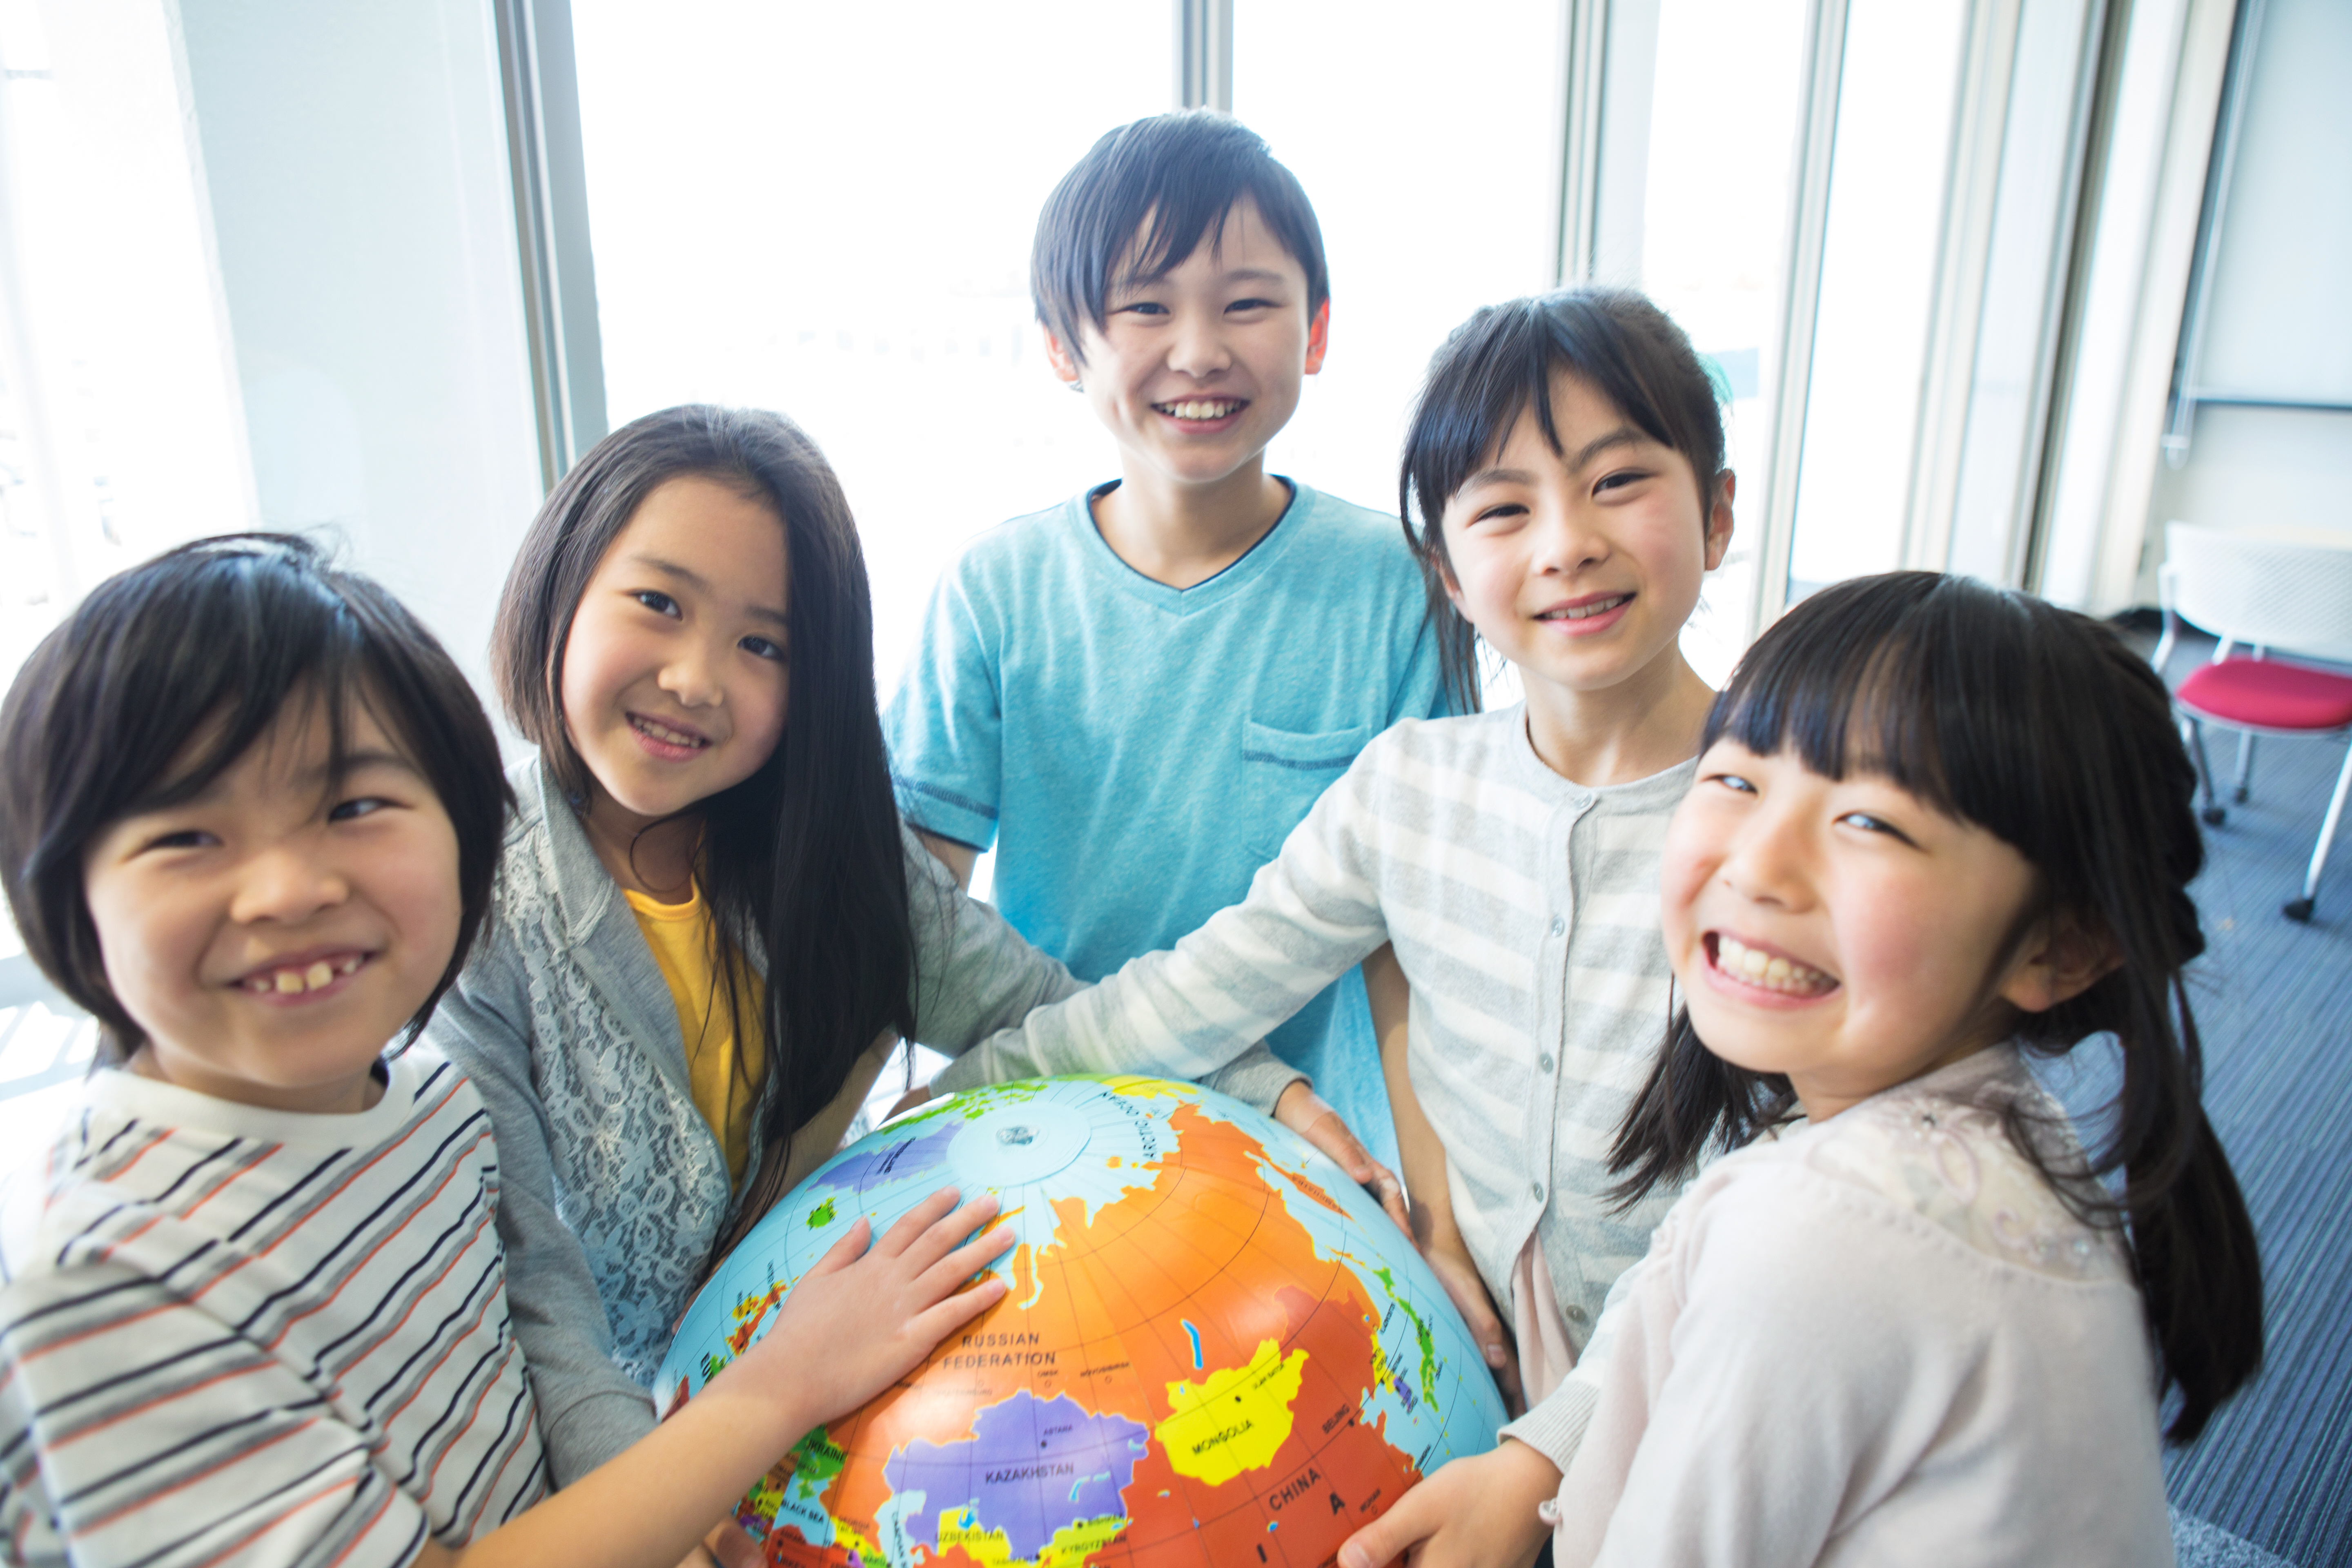 Where to? The 5 Best Countries for Teaching English Overseas